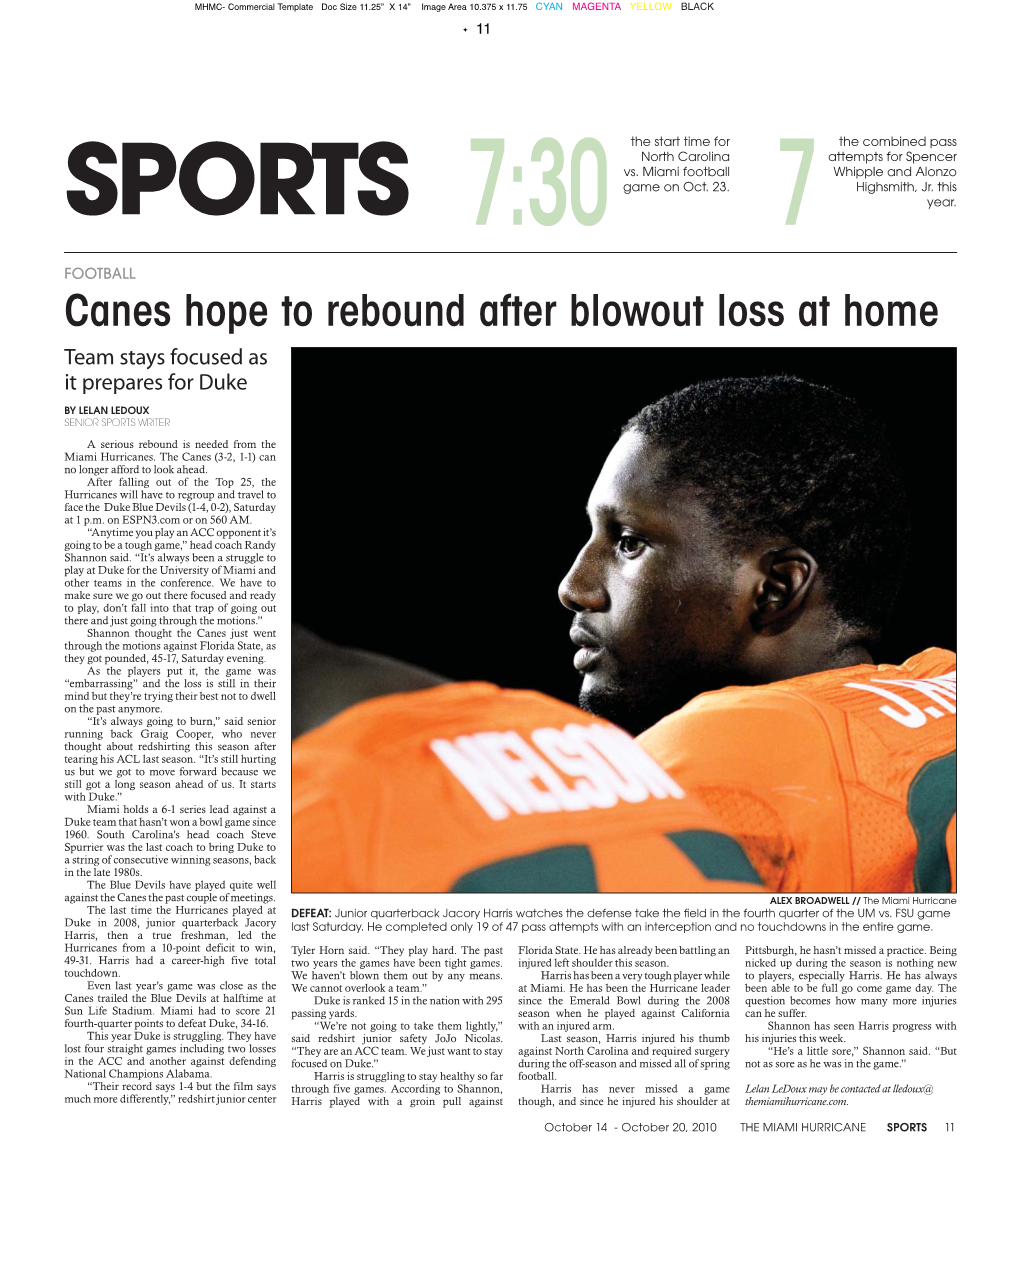 Canes Hope to Rebound After Blowout Loss at Home Team Stays Focused As It Prepares for Duke